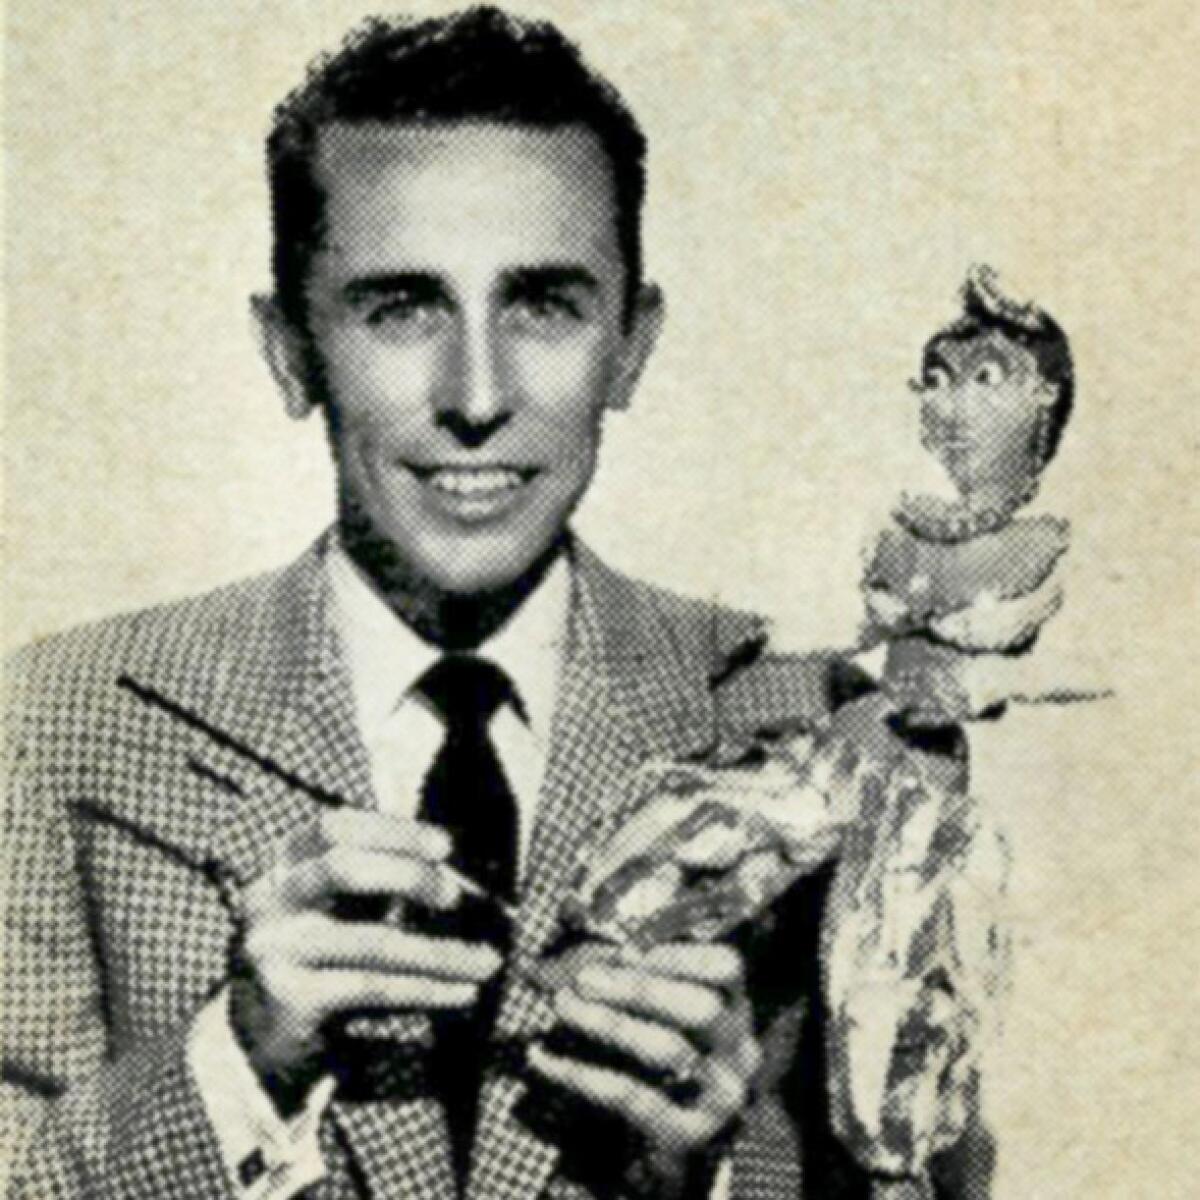 Puppeteer Daniel Llord in early 1960 performed in a fundraiser to benefit the Crescenta-Cañada YMCA Building Fund.